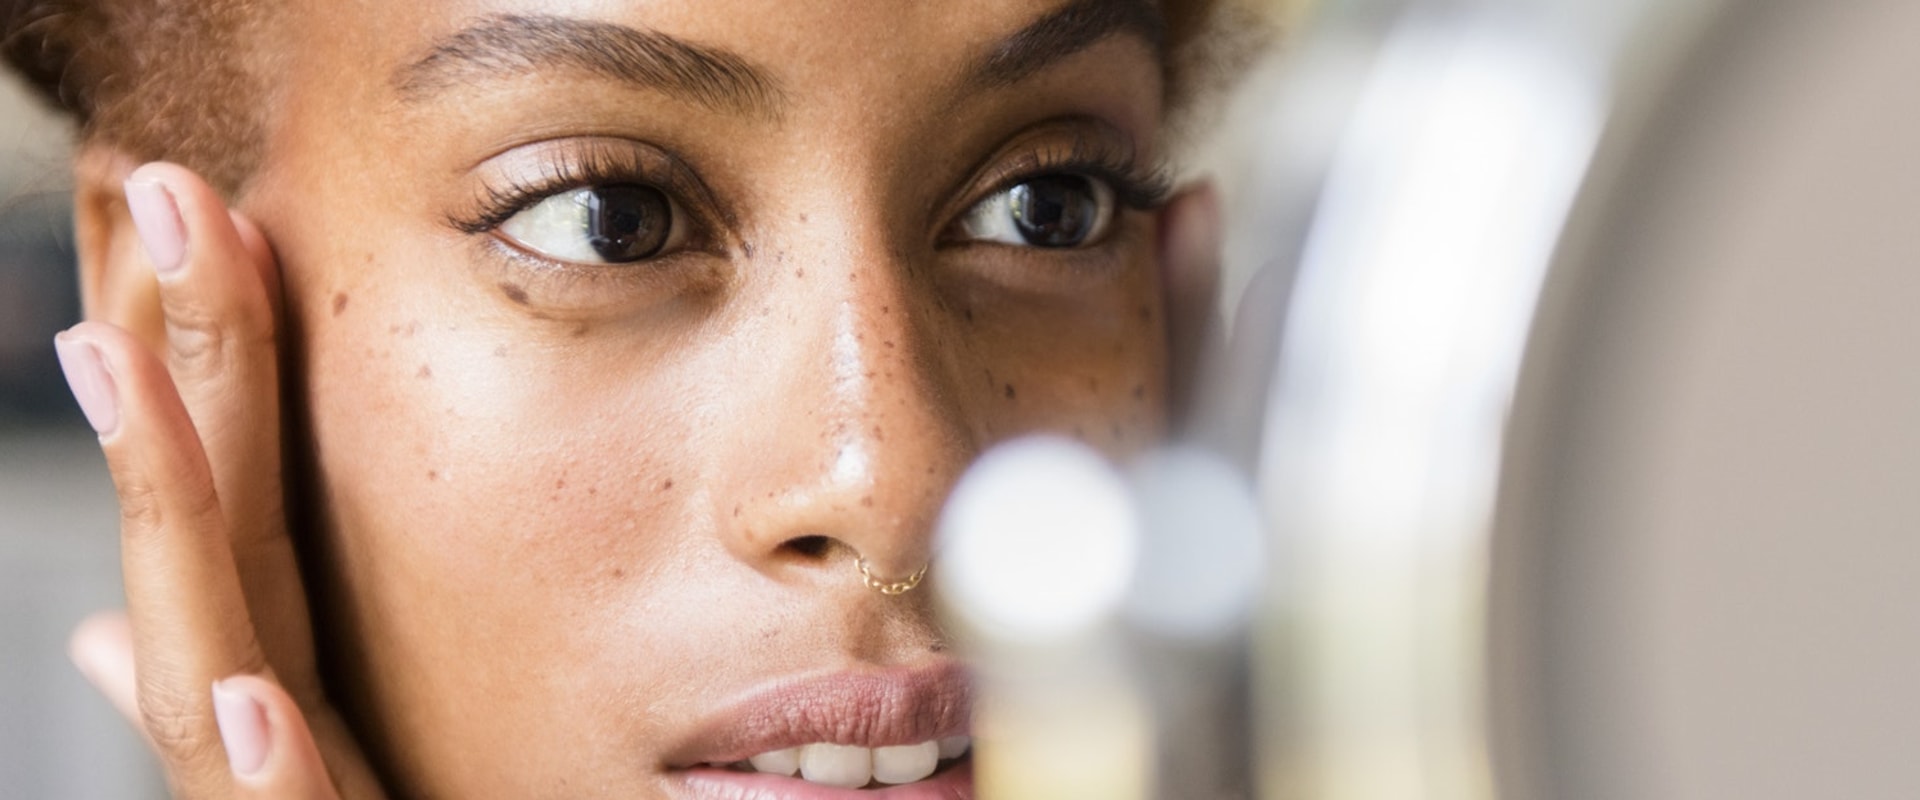 Facial Acne Treatments: What to Know